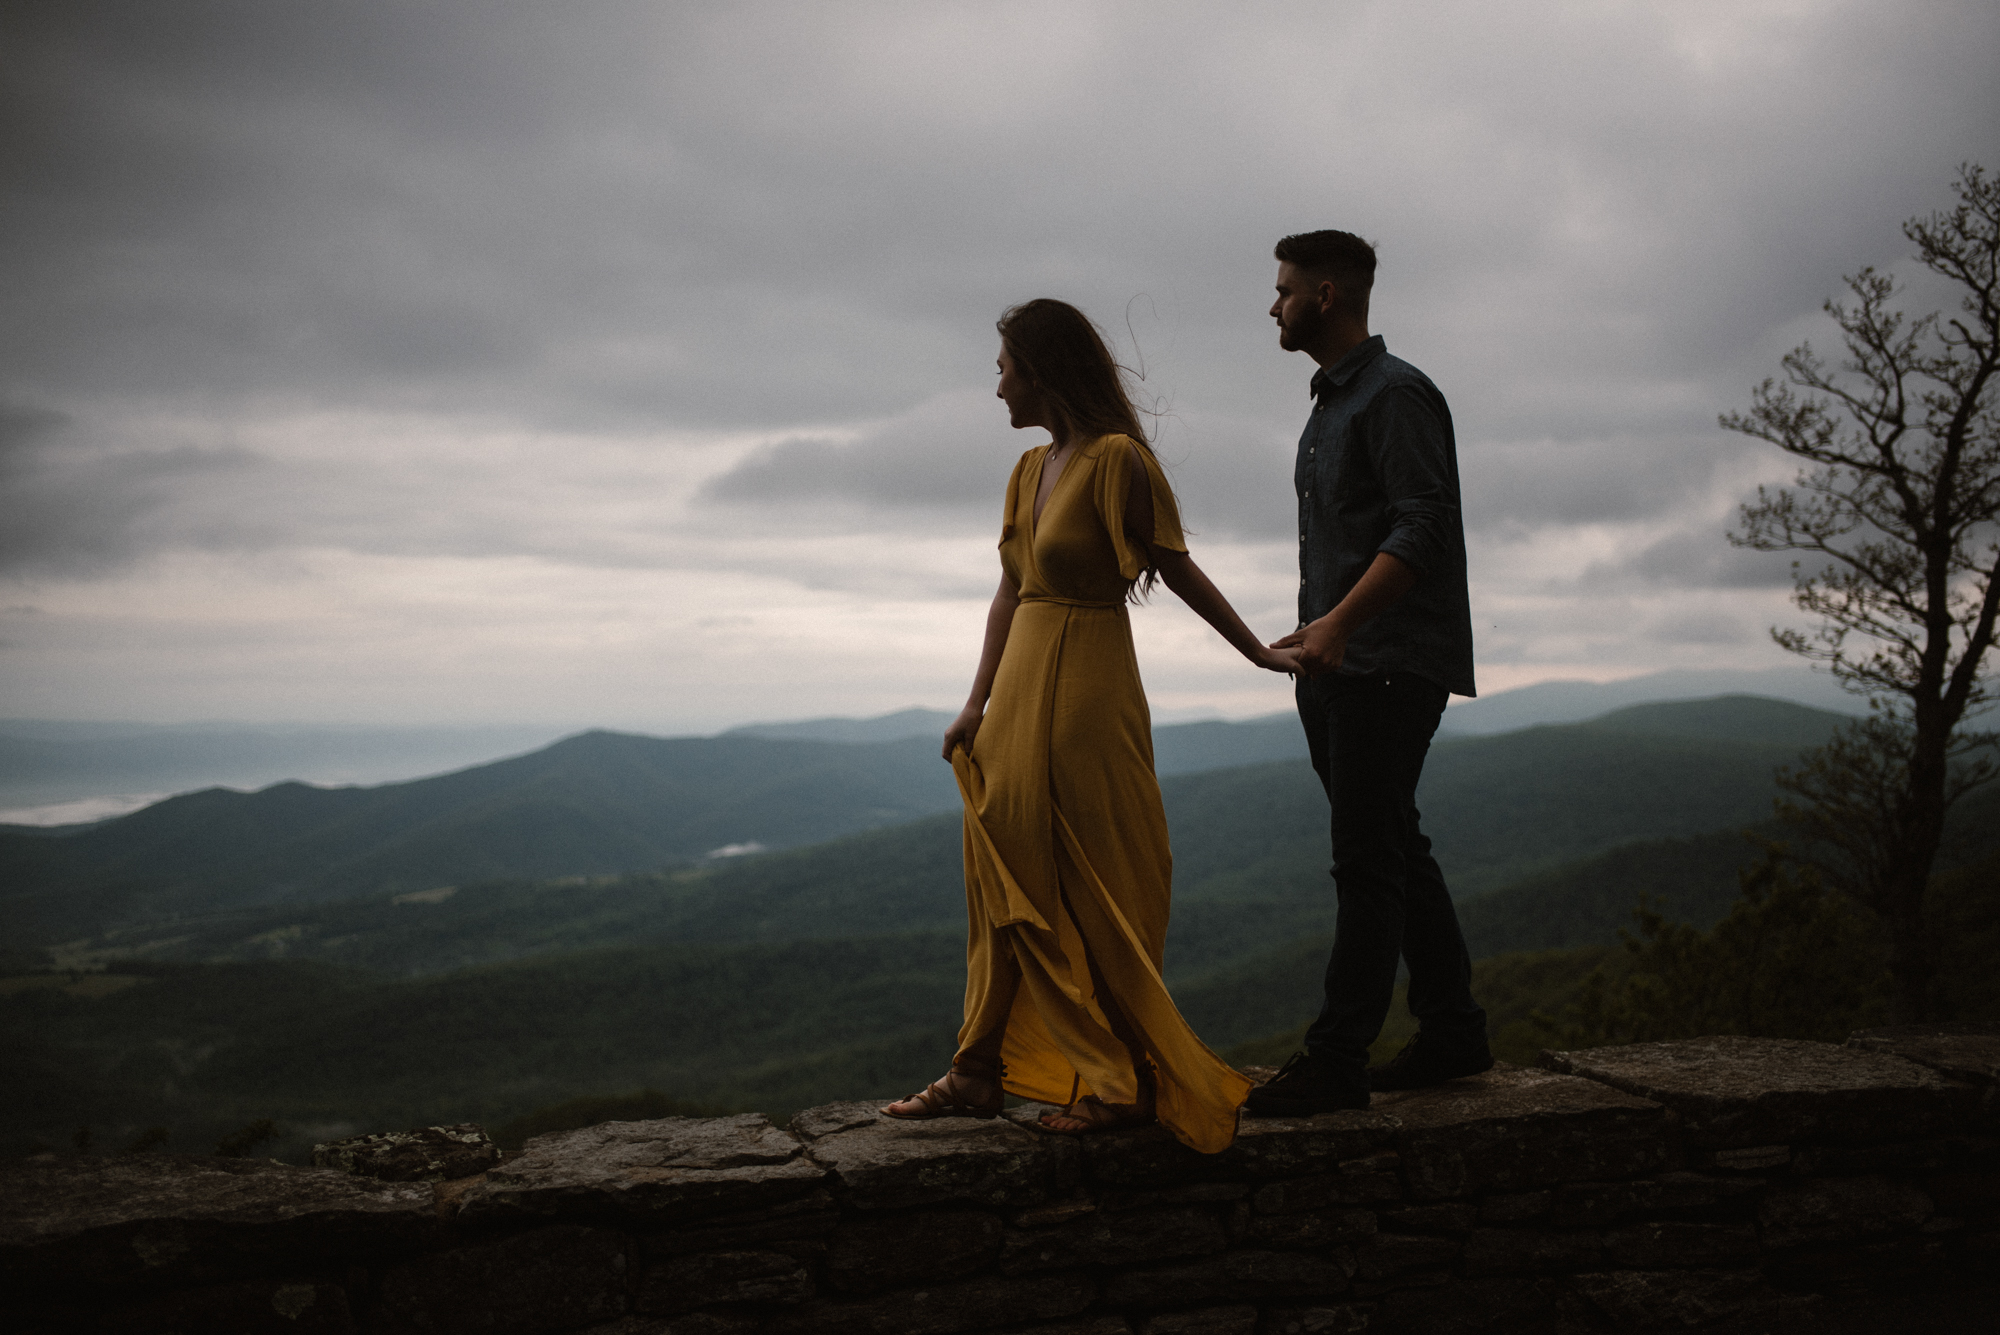 Camryn and Larry Sunrise Engagement Session in Shenandoah National Park - Things to Do in Luray Virginia - Adventurous Couple Photo Shoot White Sails Creative_17.jpg